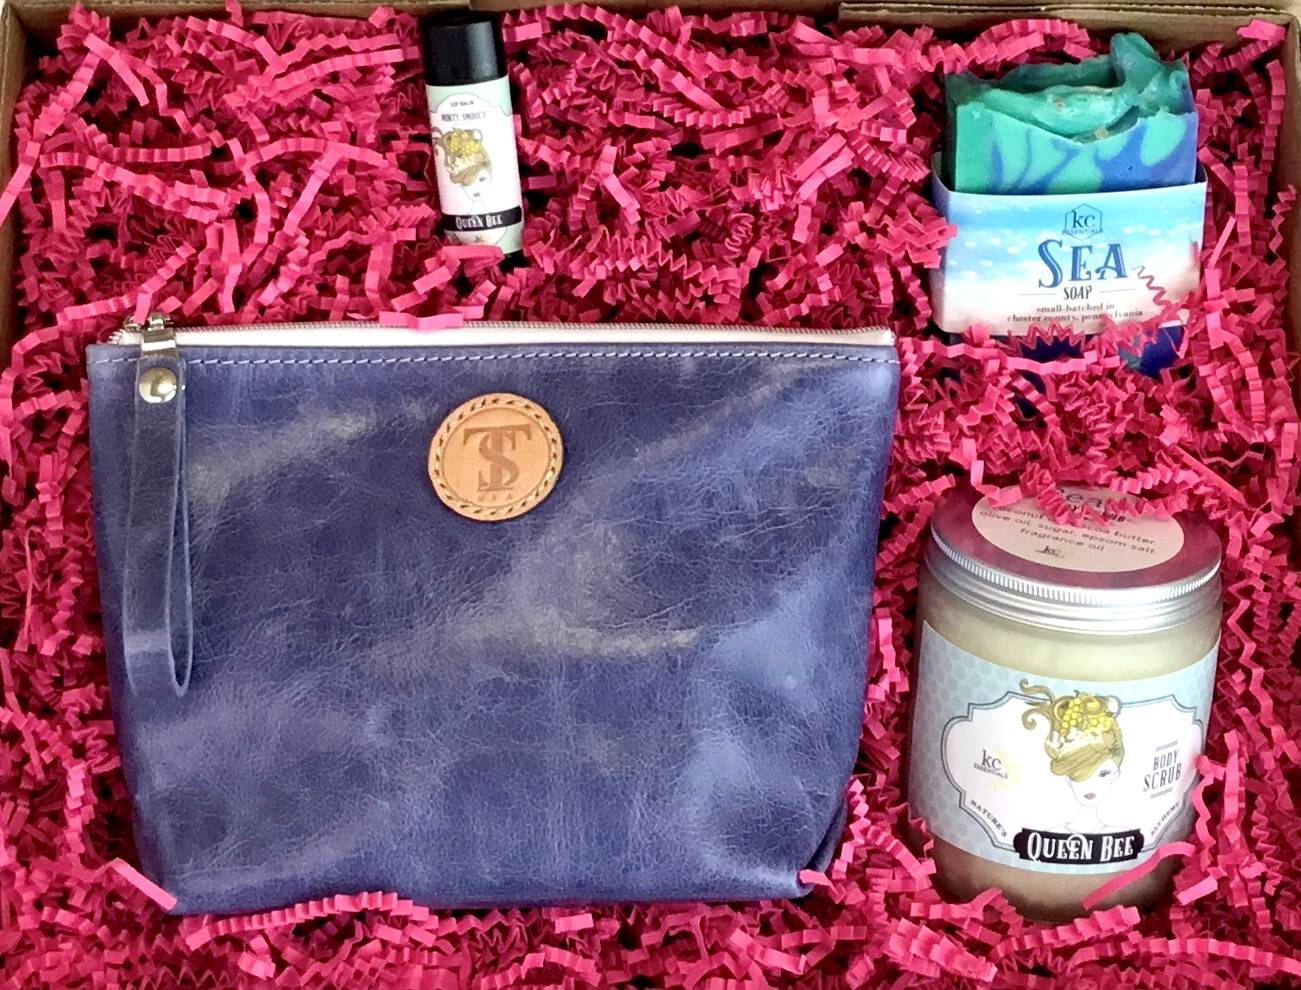 Town &amp; Shore Handcrafted Serenity Gift set featuring T5 Leather bath kit and brush bag shown in denim blue calfskin leather. KC Essentials artisan made vegan bar soap, essential oils body scrub and soothing lip balm. Arranged in gift box with sustainable eco-friendly bright pink crinkle paper.